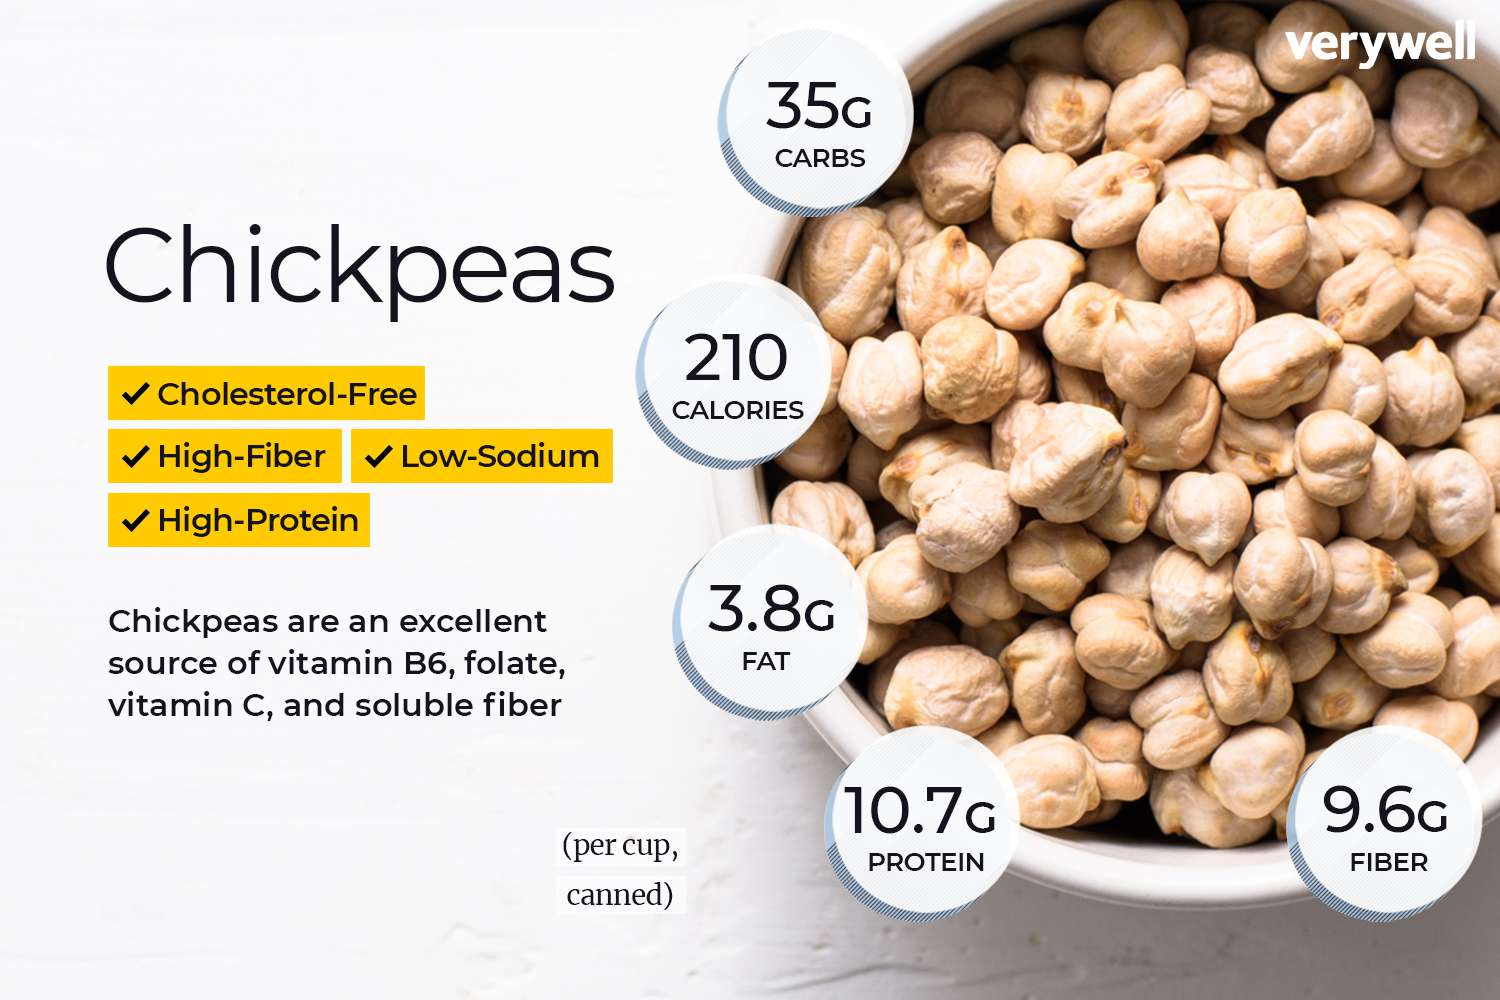 What You Need to Know About the Health Benefits of Chickpeas